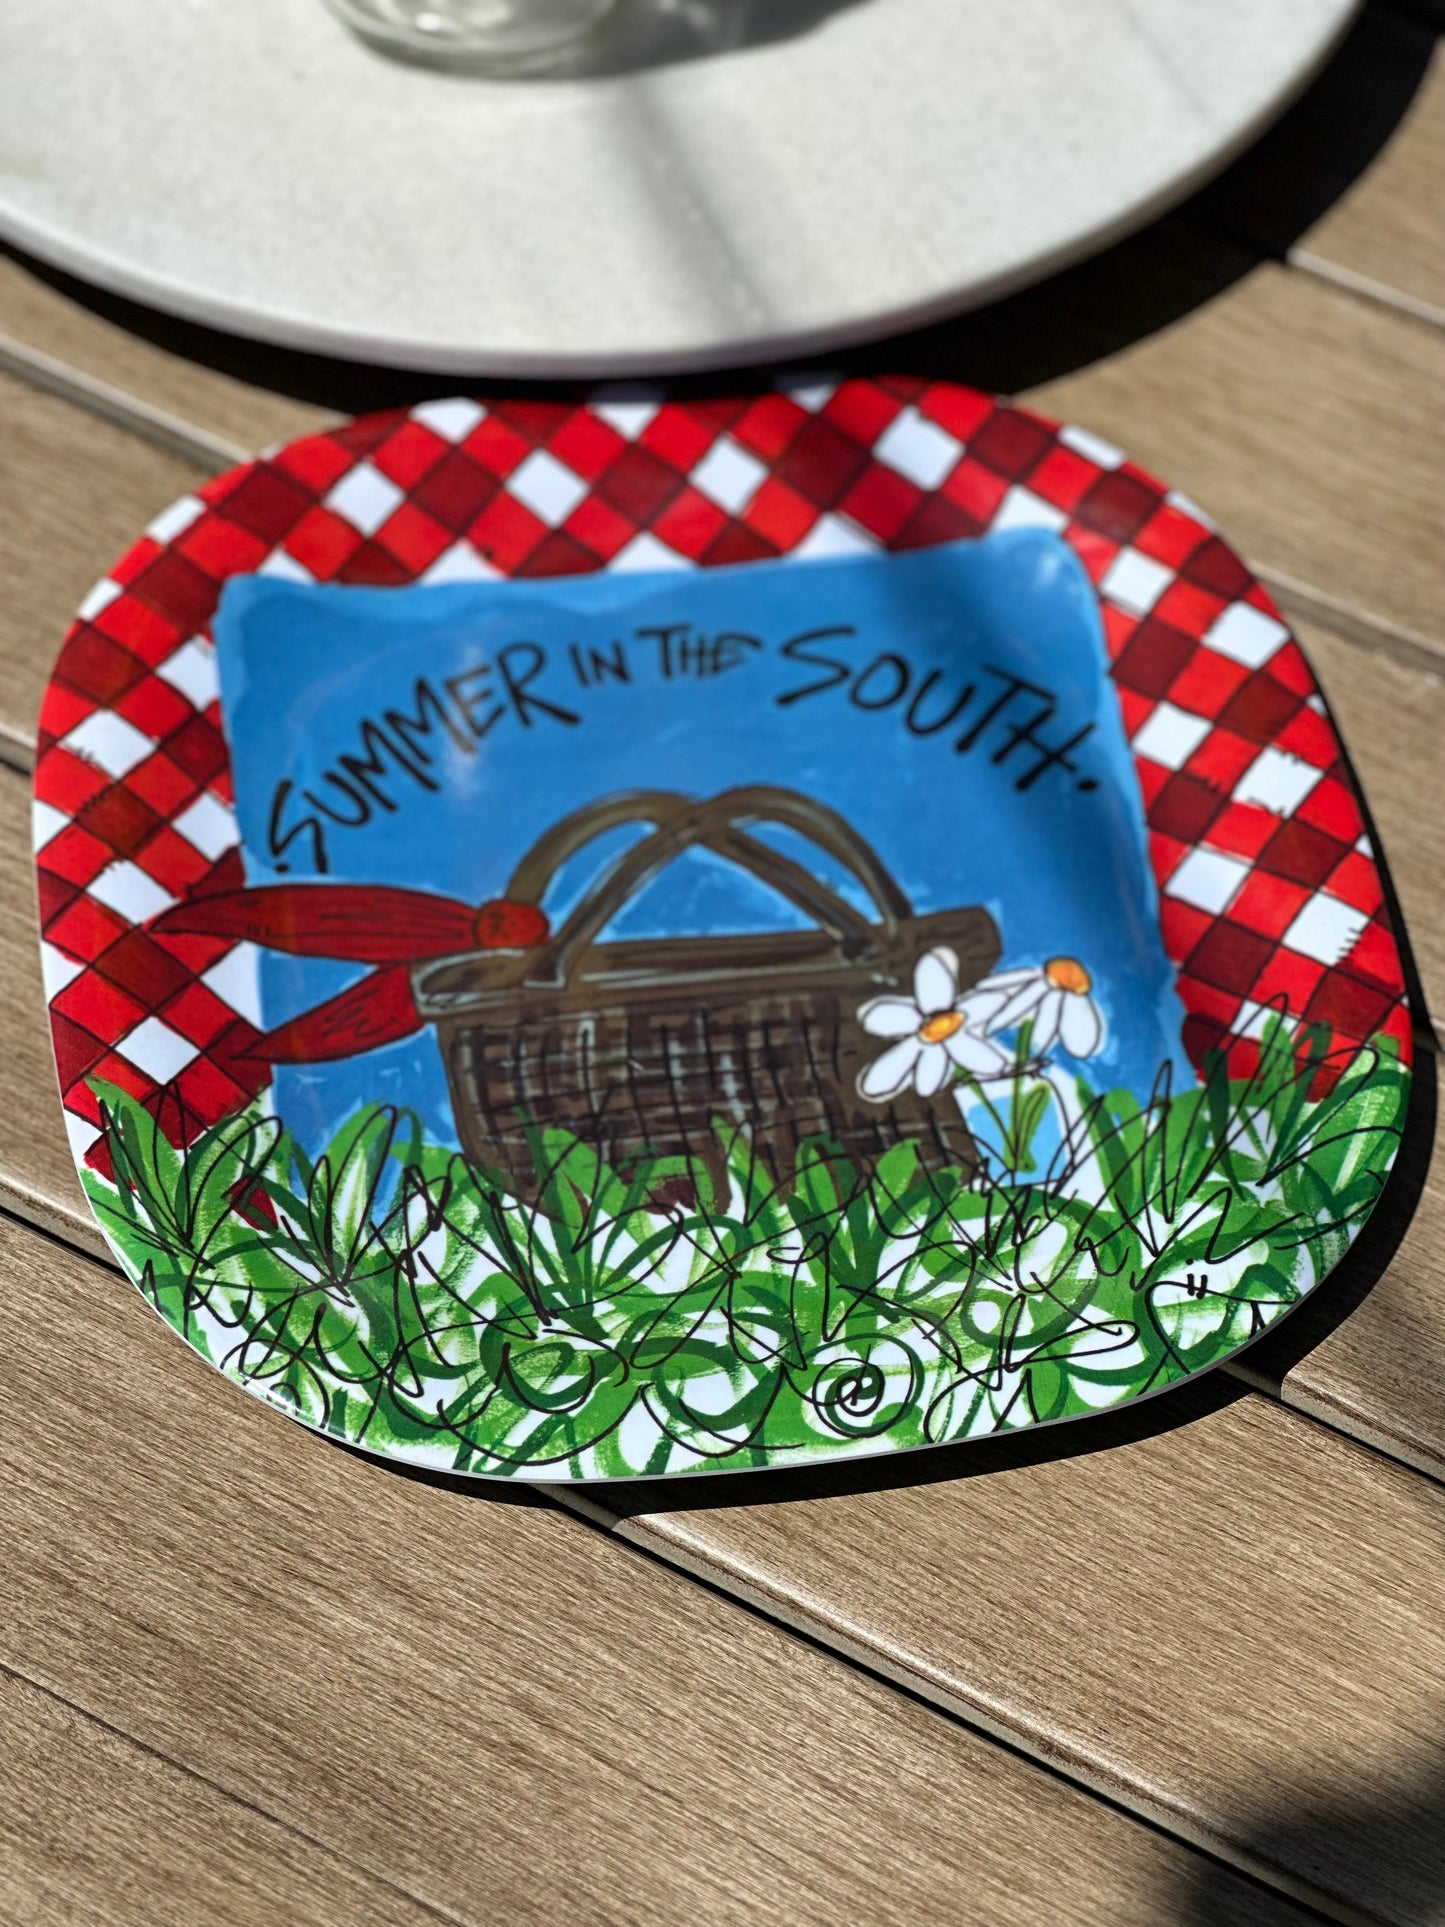 Summer In The South Melamine Plate